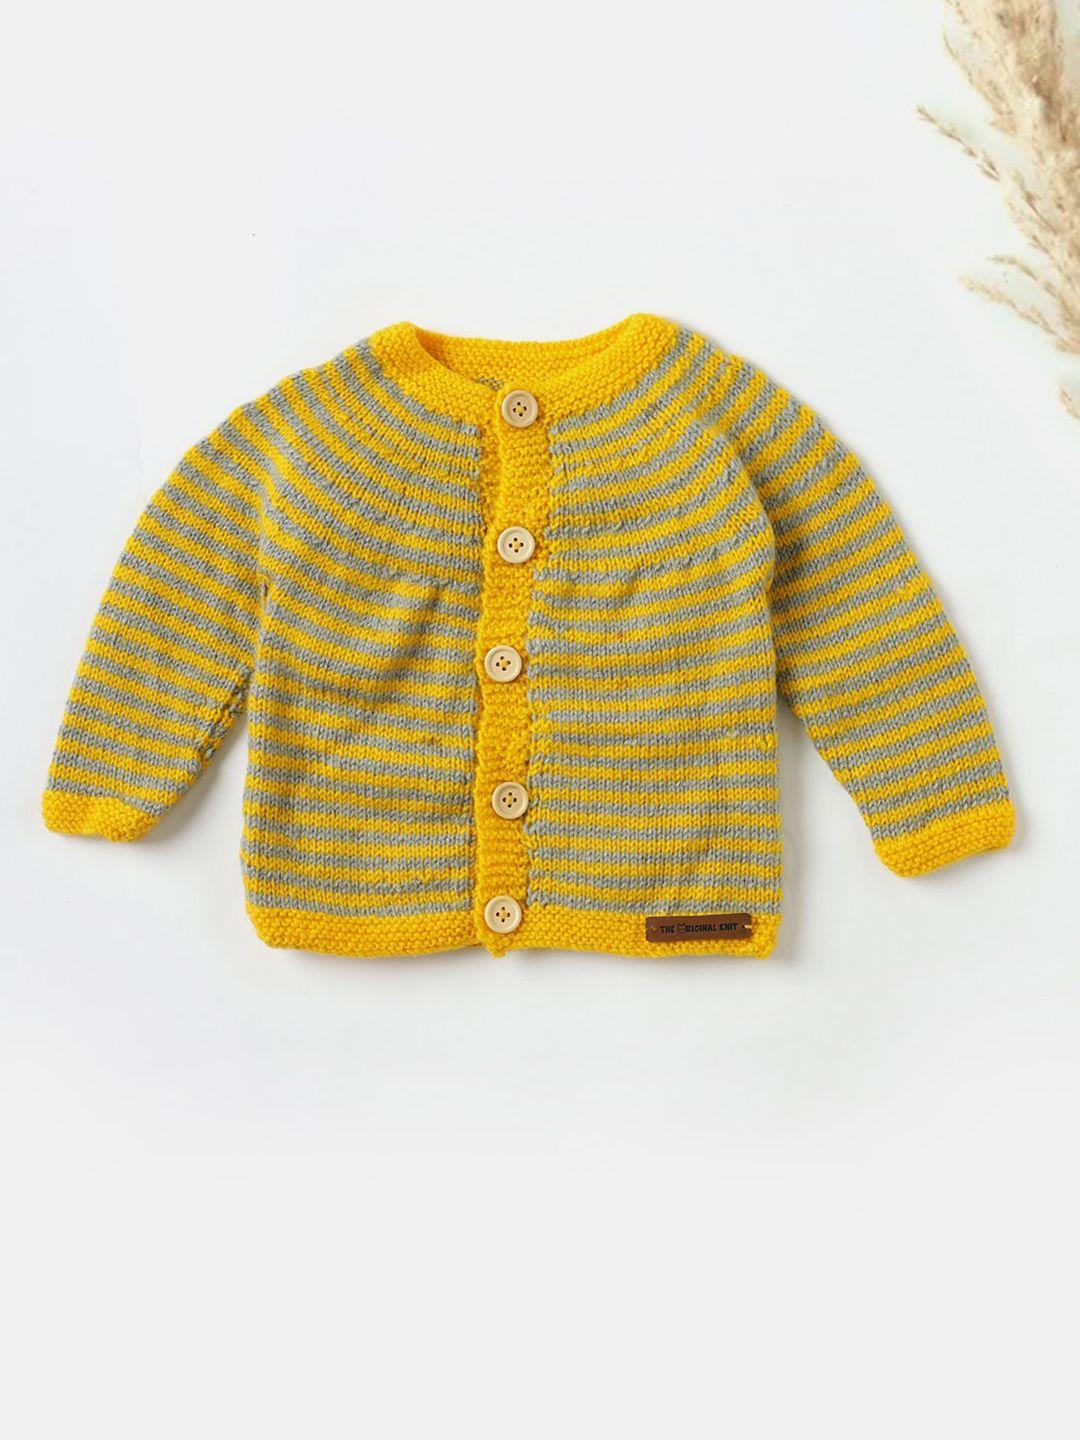 the original knit unisex kids yellow & grey cable knit cardigan